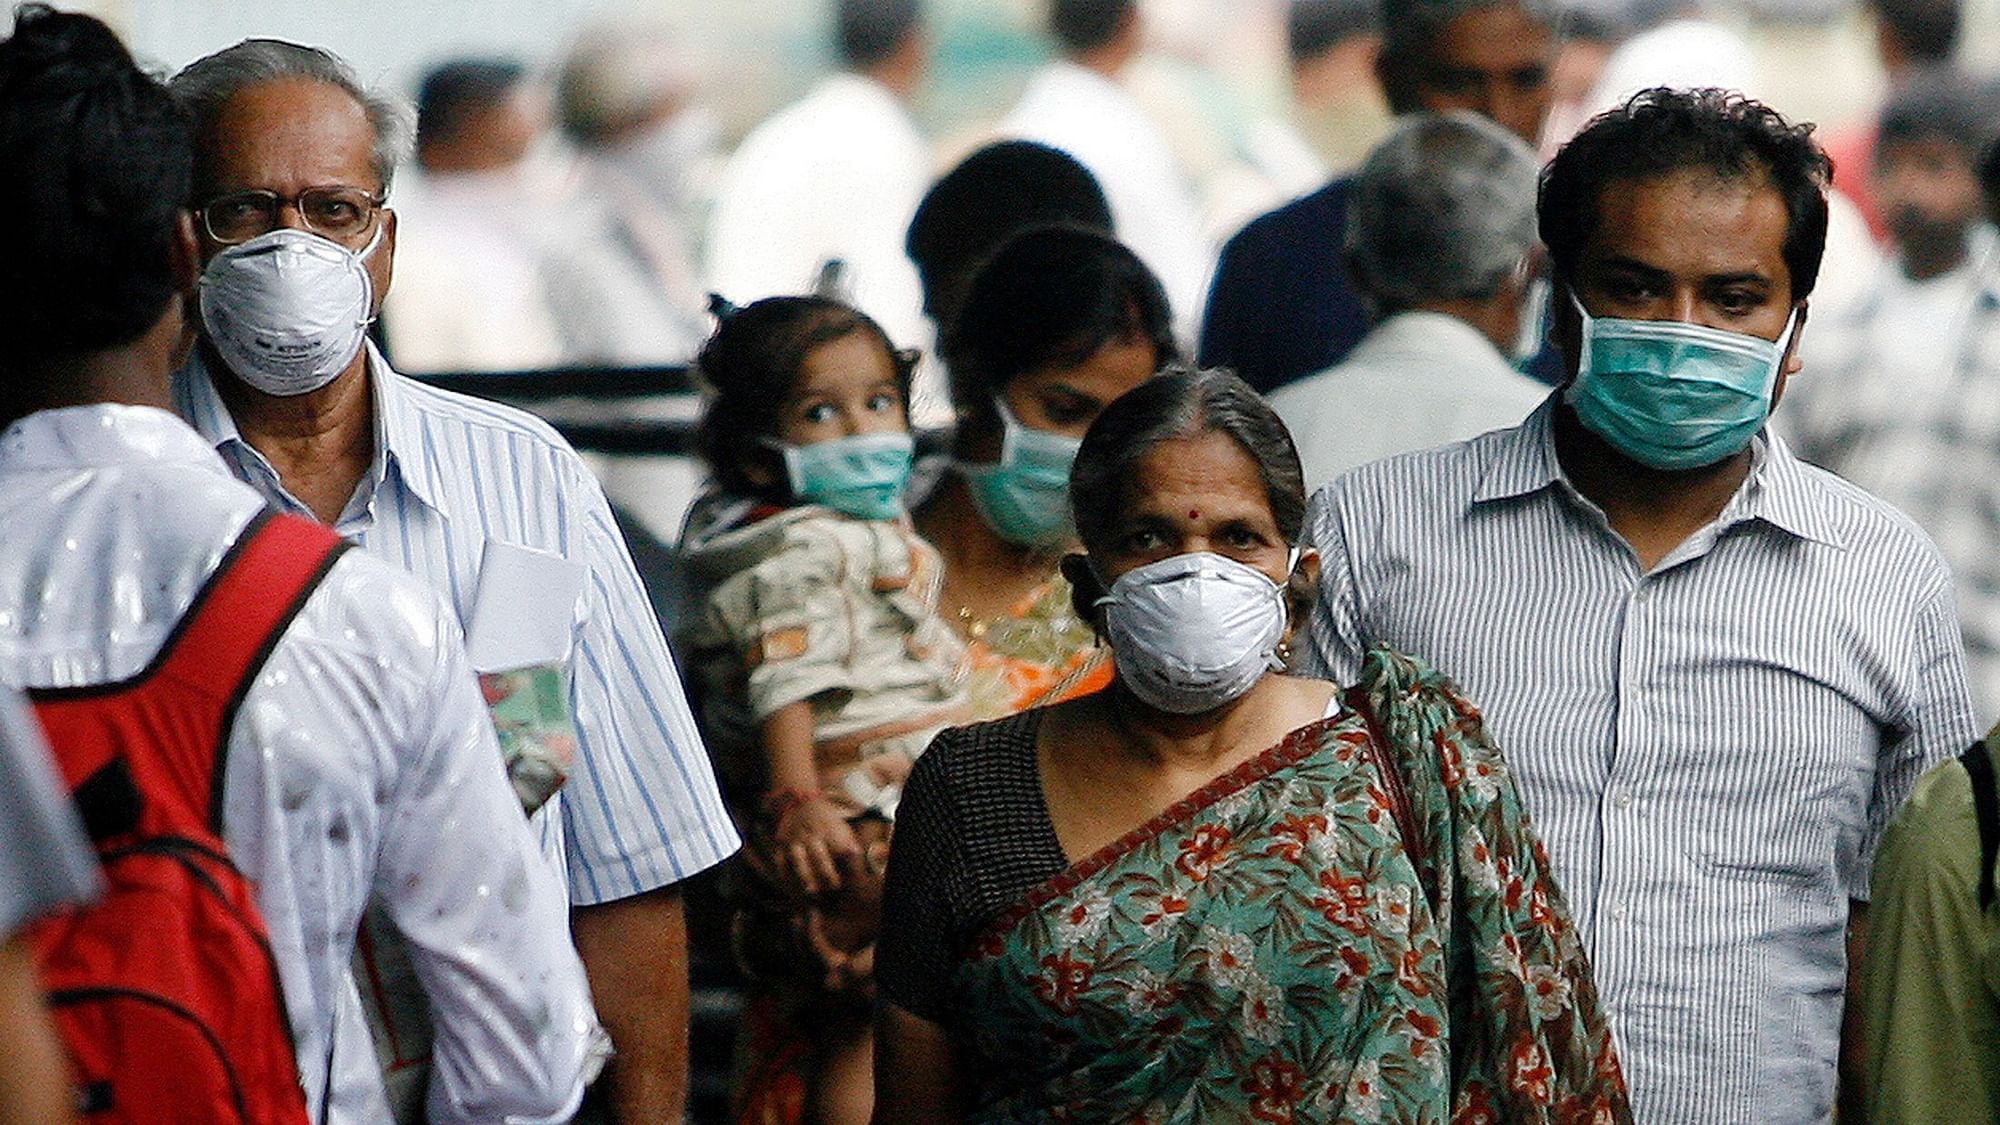 Representational image of people wearing masks to protect themselves against swine flu.